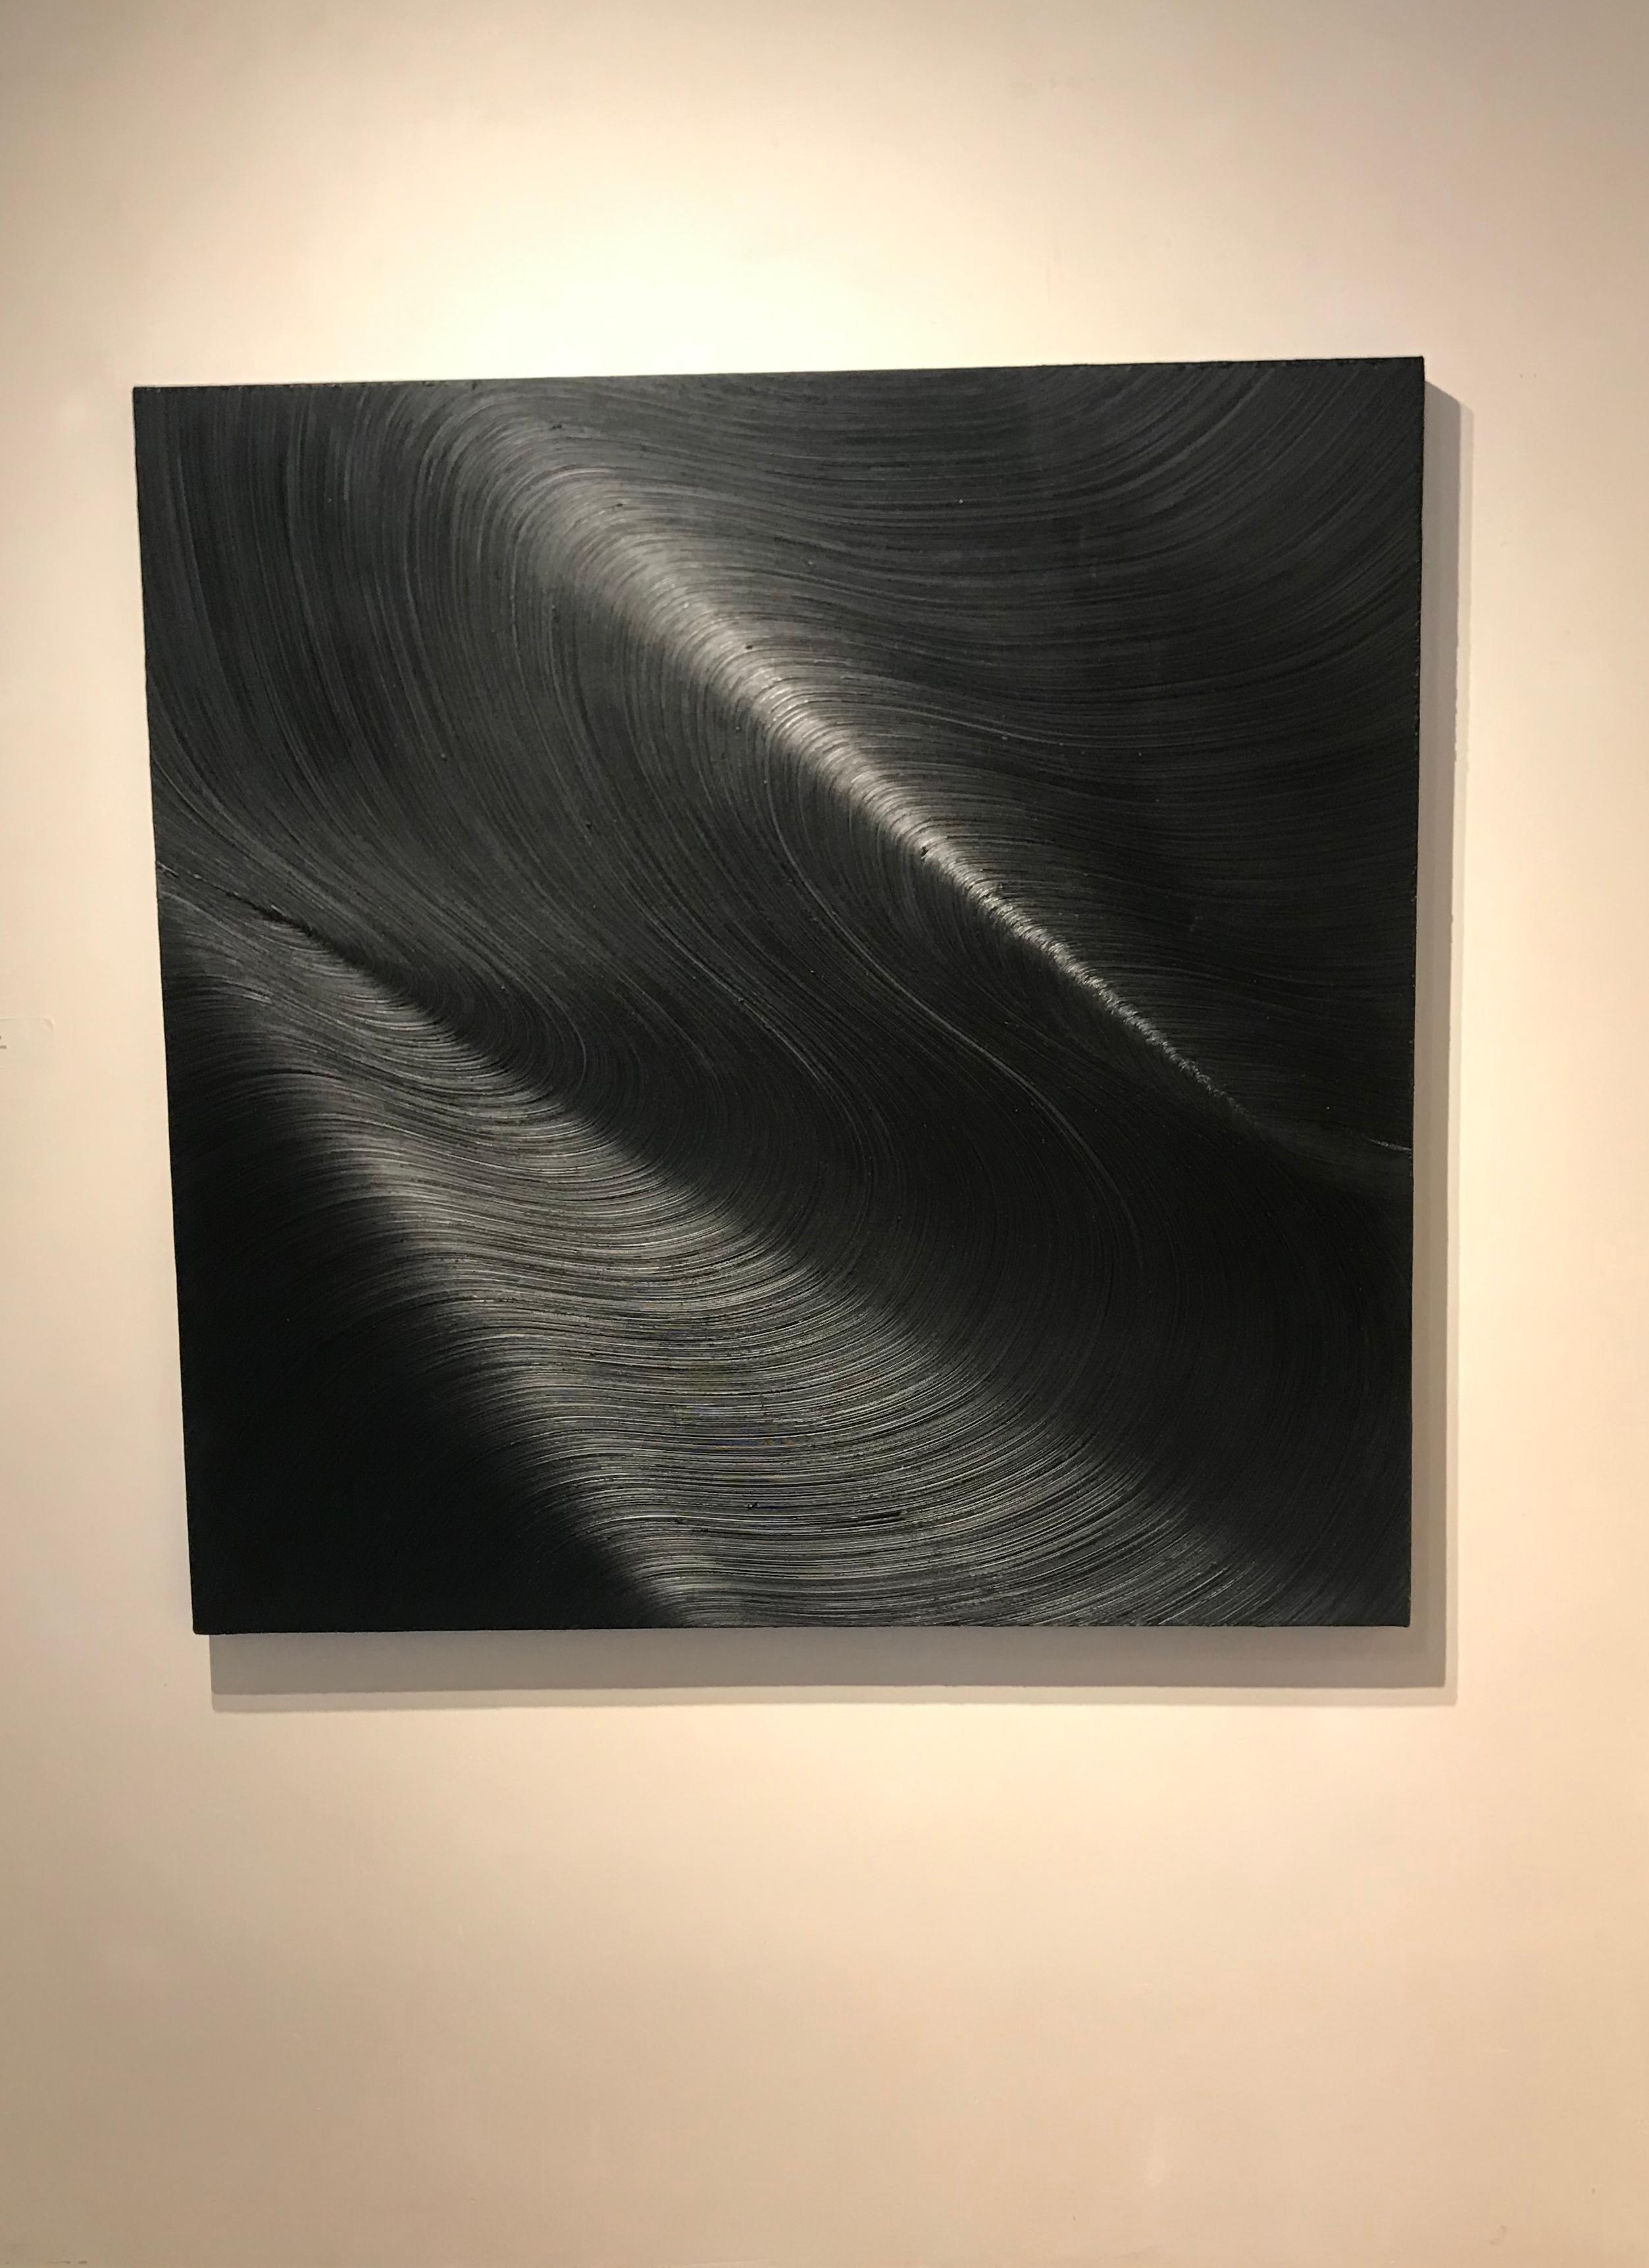 New York based painter James Austin Murray works within self imposed rules that allow him to create engaging paintings in pure Ivory black oil on canvas. The unadulterated pigment allows for the texture and movement of the paint to come through.